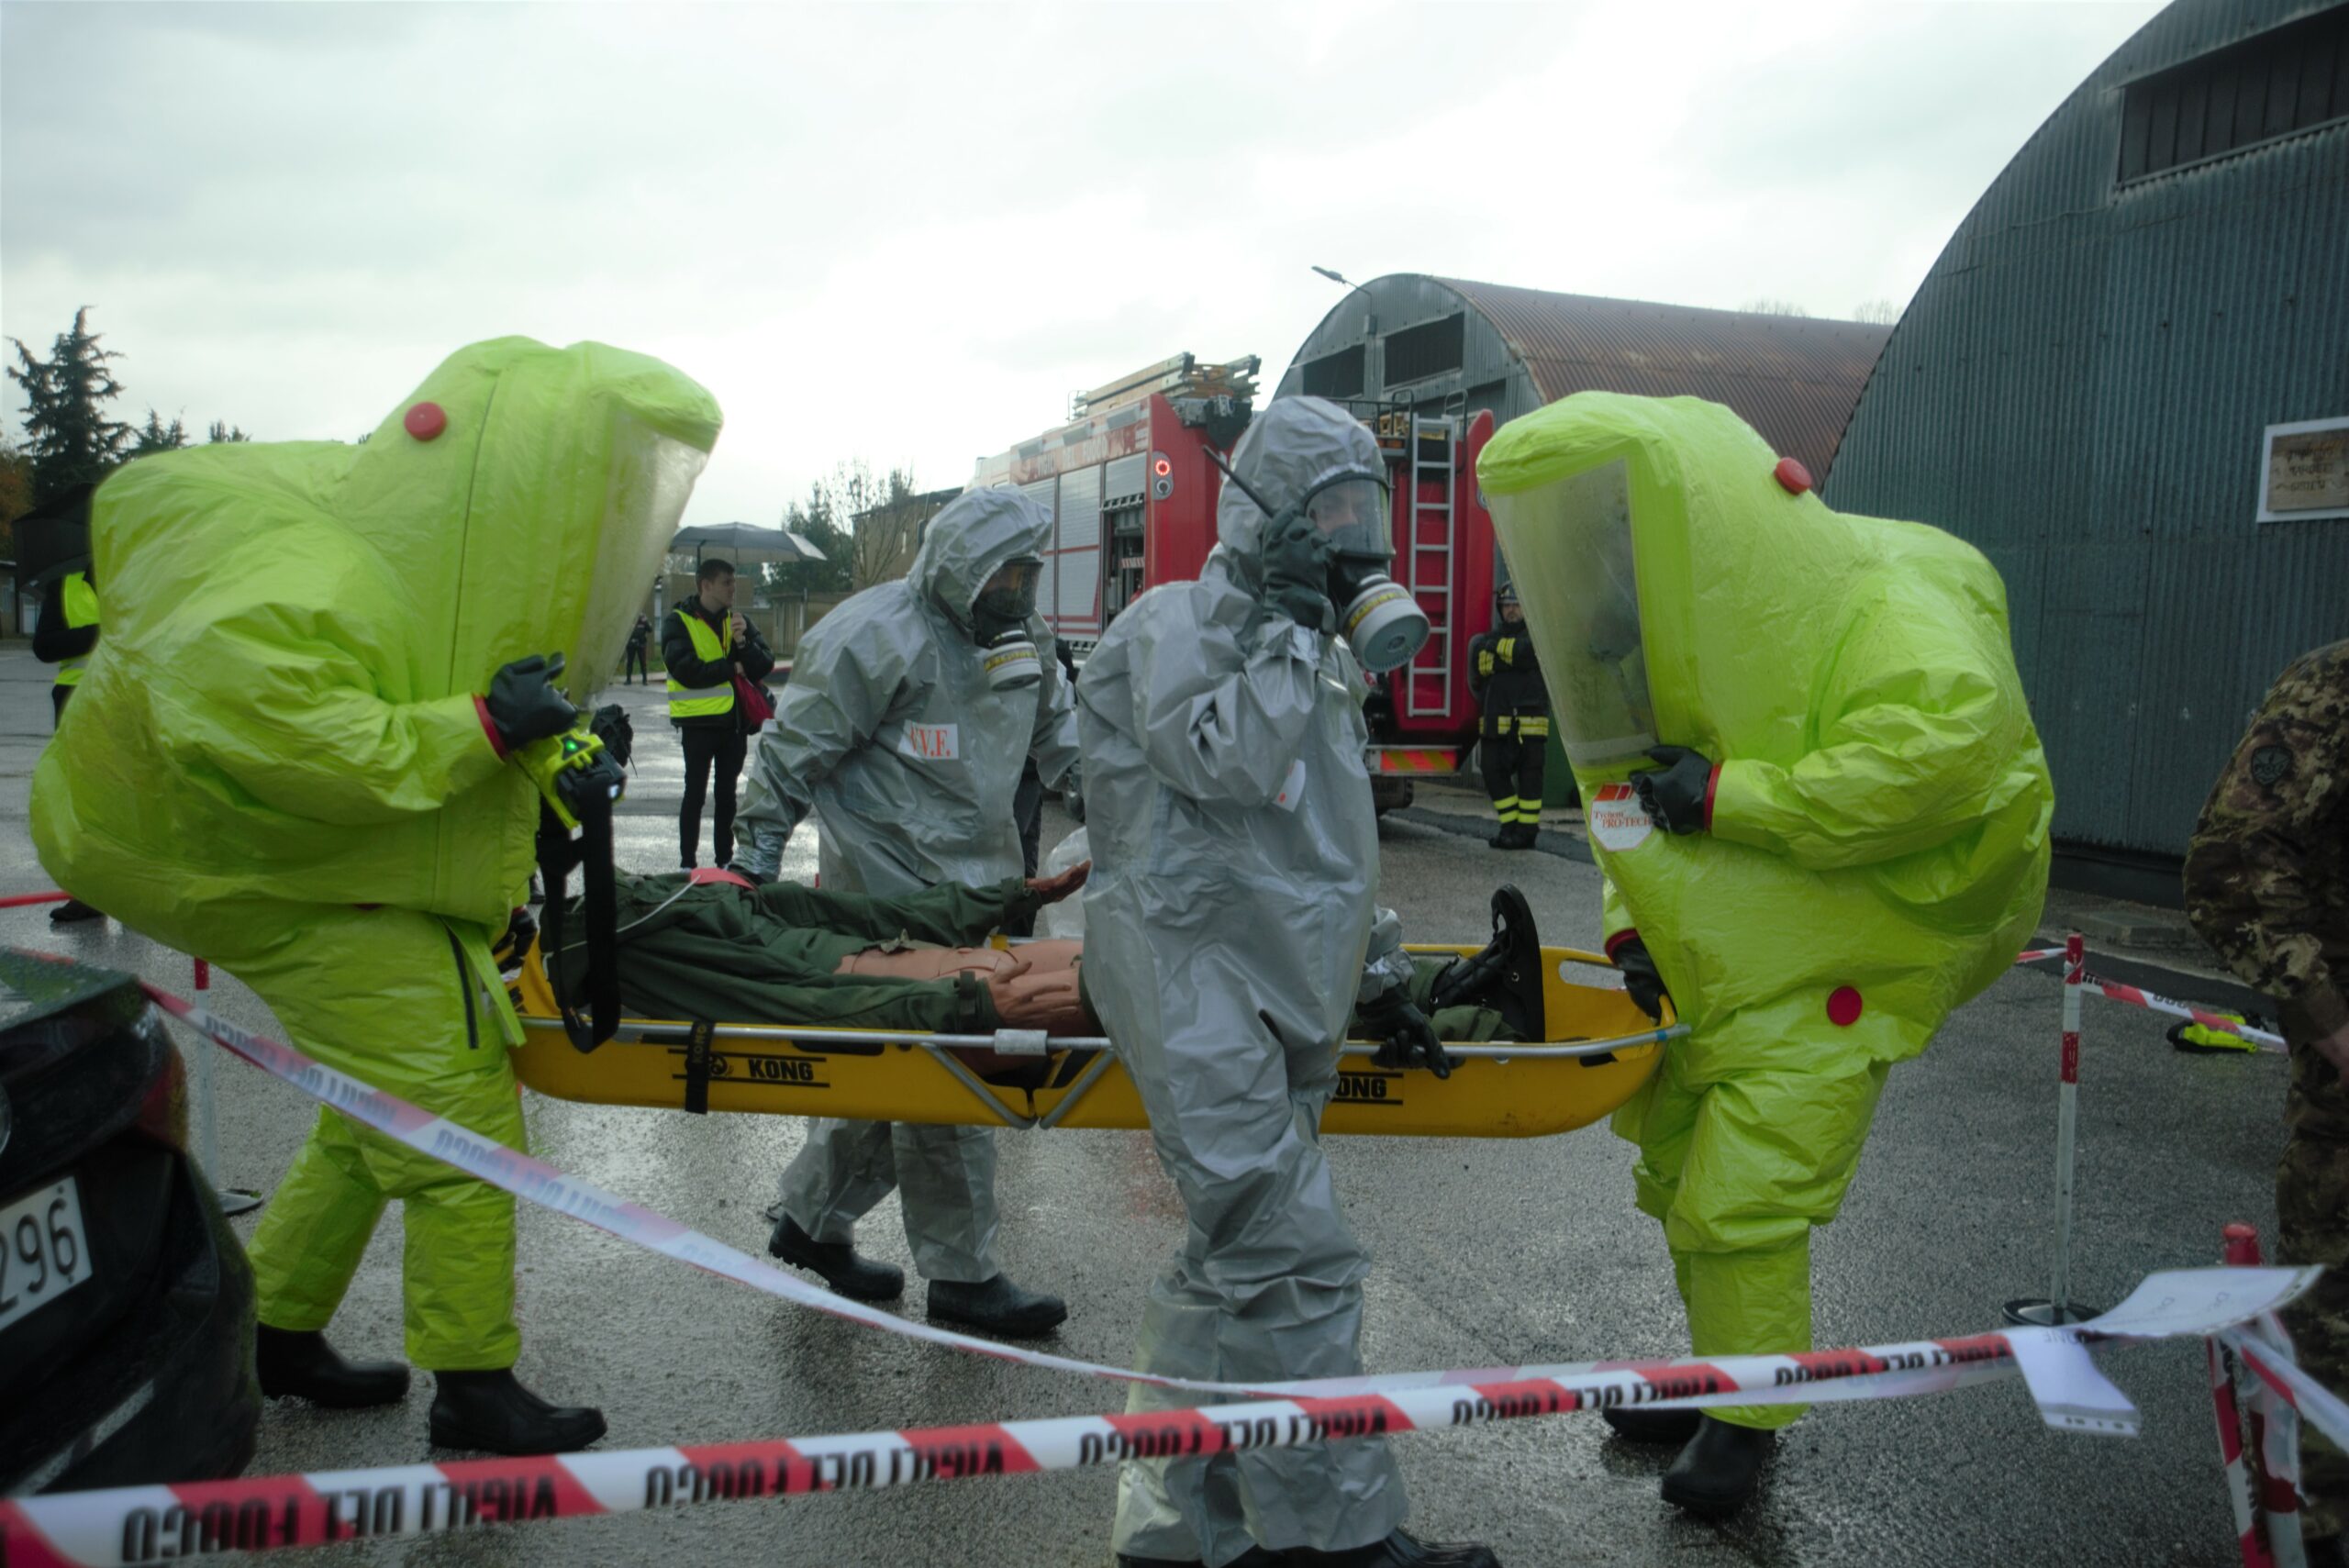 Two persons in a green hazmat uniform and other two are wearing a grey hazmat uniform are evacuating passenger, in this case a mannequin, on bench from the hot zone. The photo is taken outside the platform.